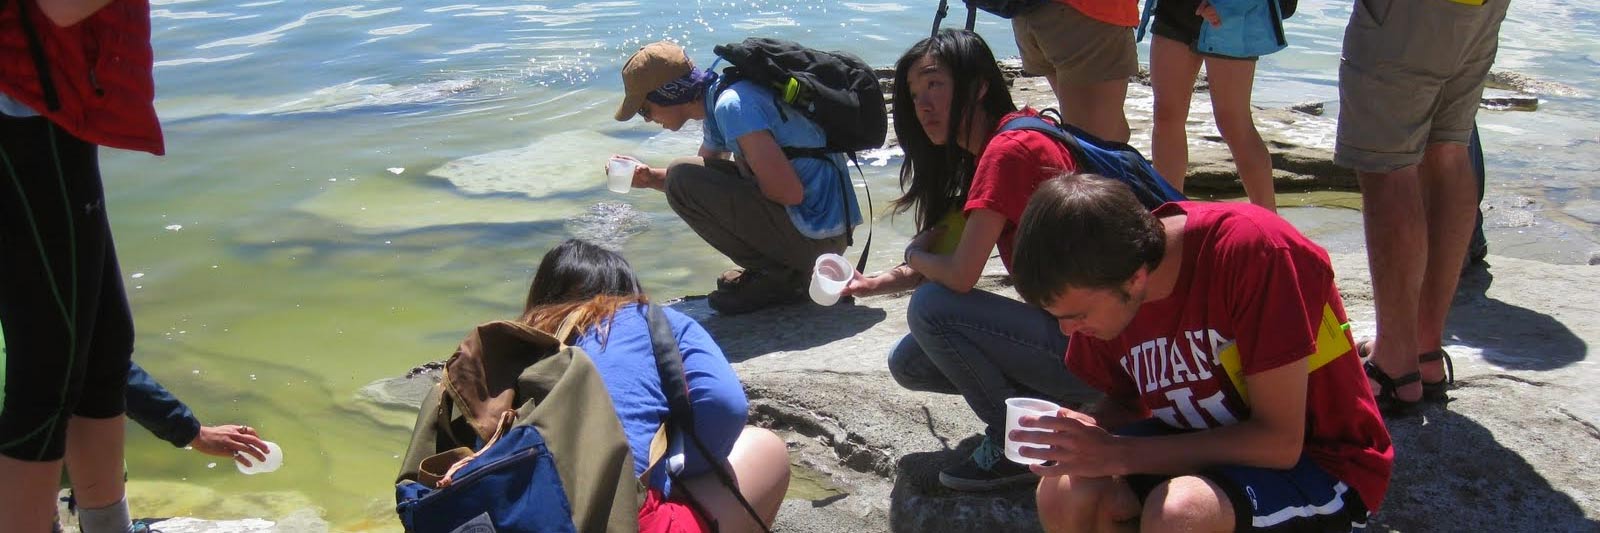 Students collecting water samples in Sierra Nevada